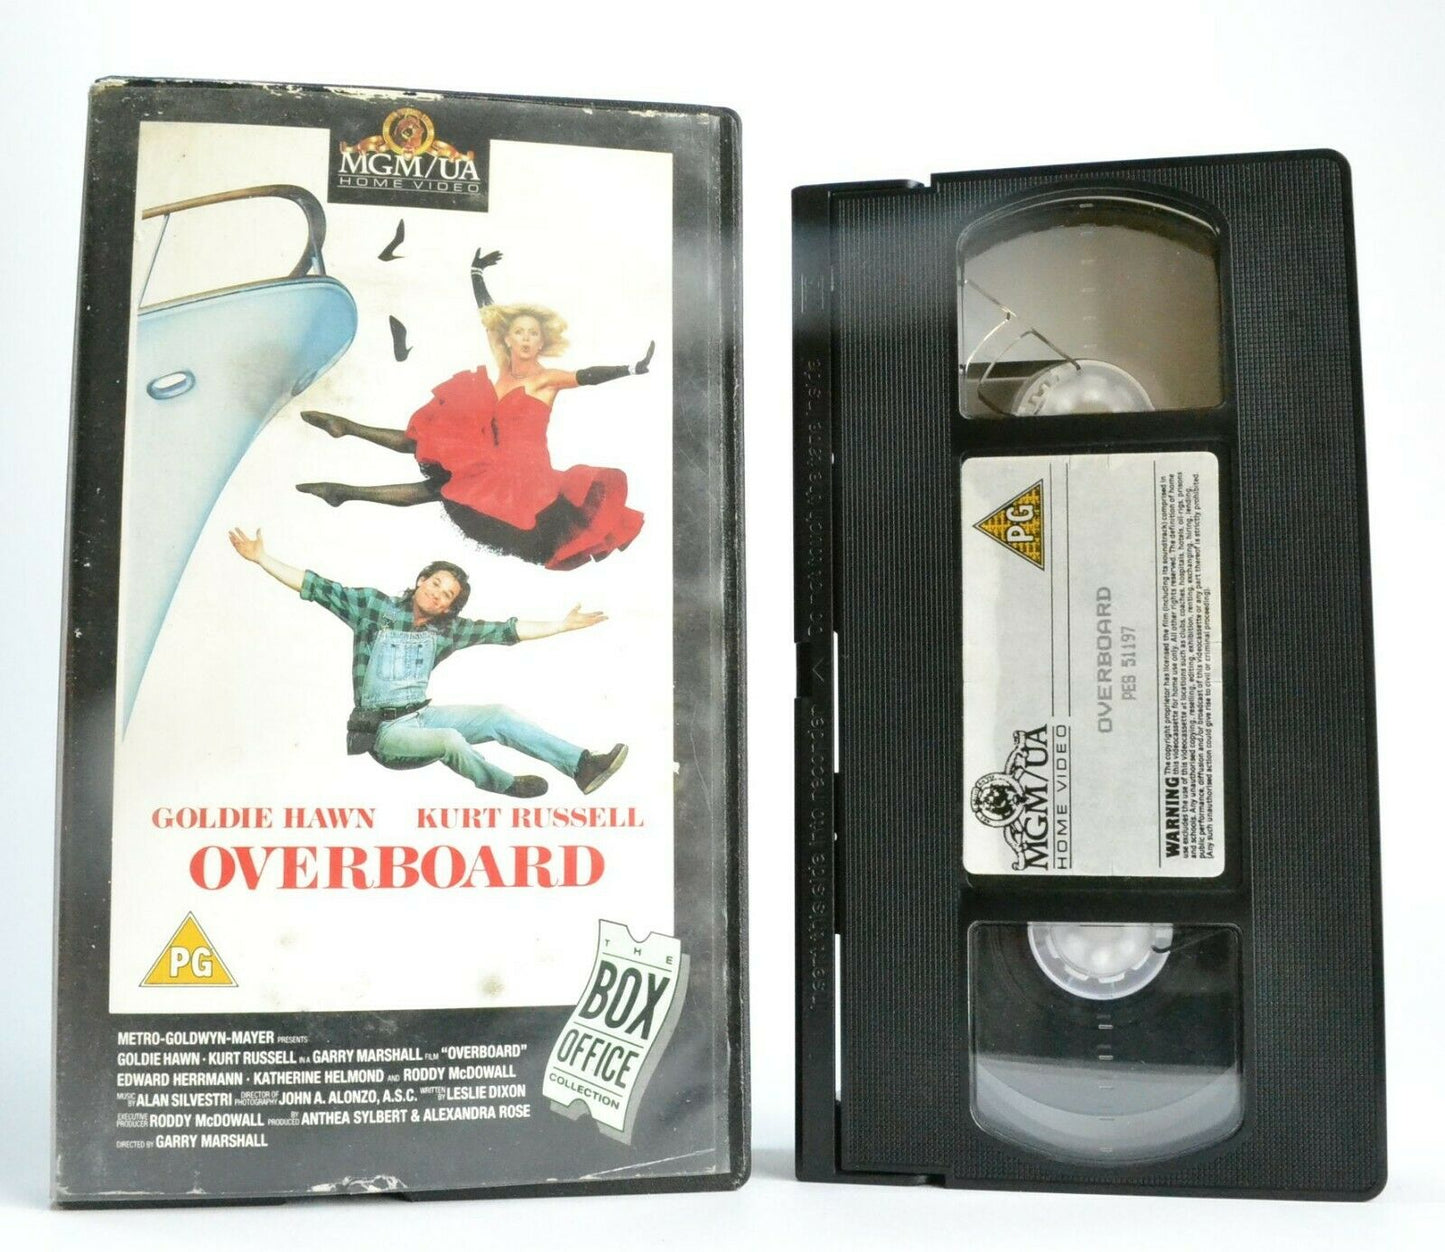 Overboard: (1987) MGM/UA - Cult Romantic Comedy - Goldie Hawn/Kurt Russell - VHS-